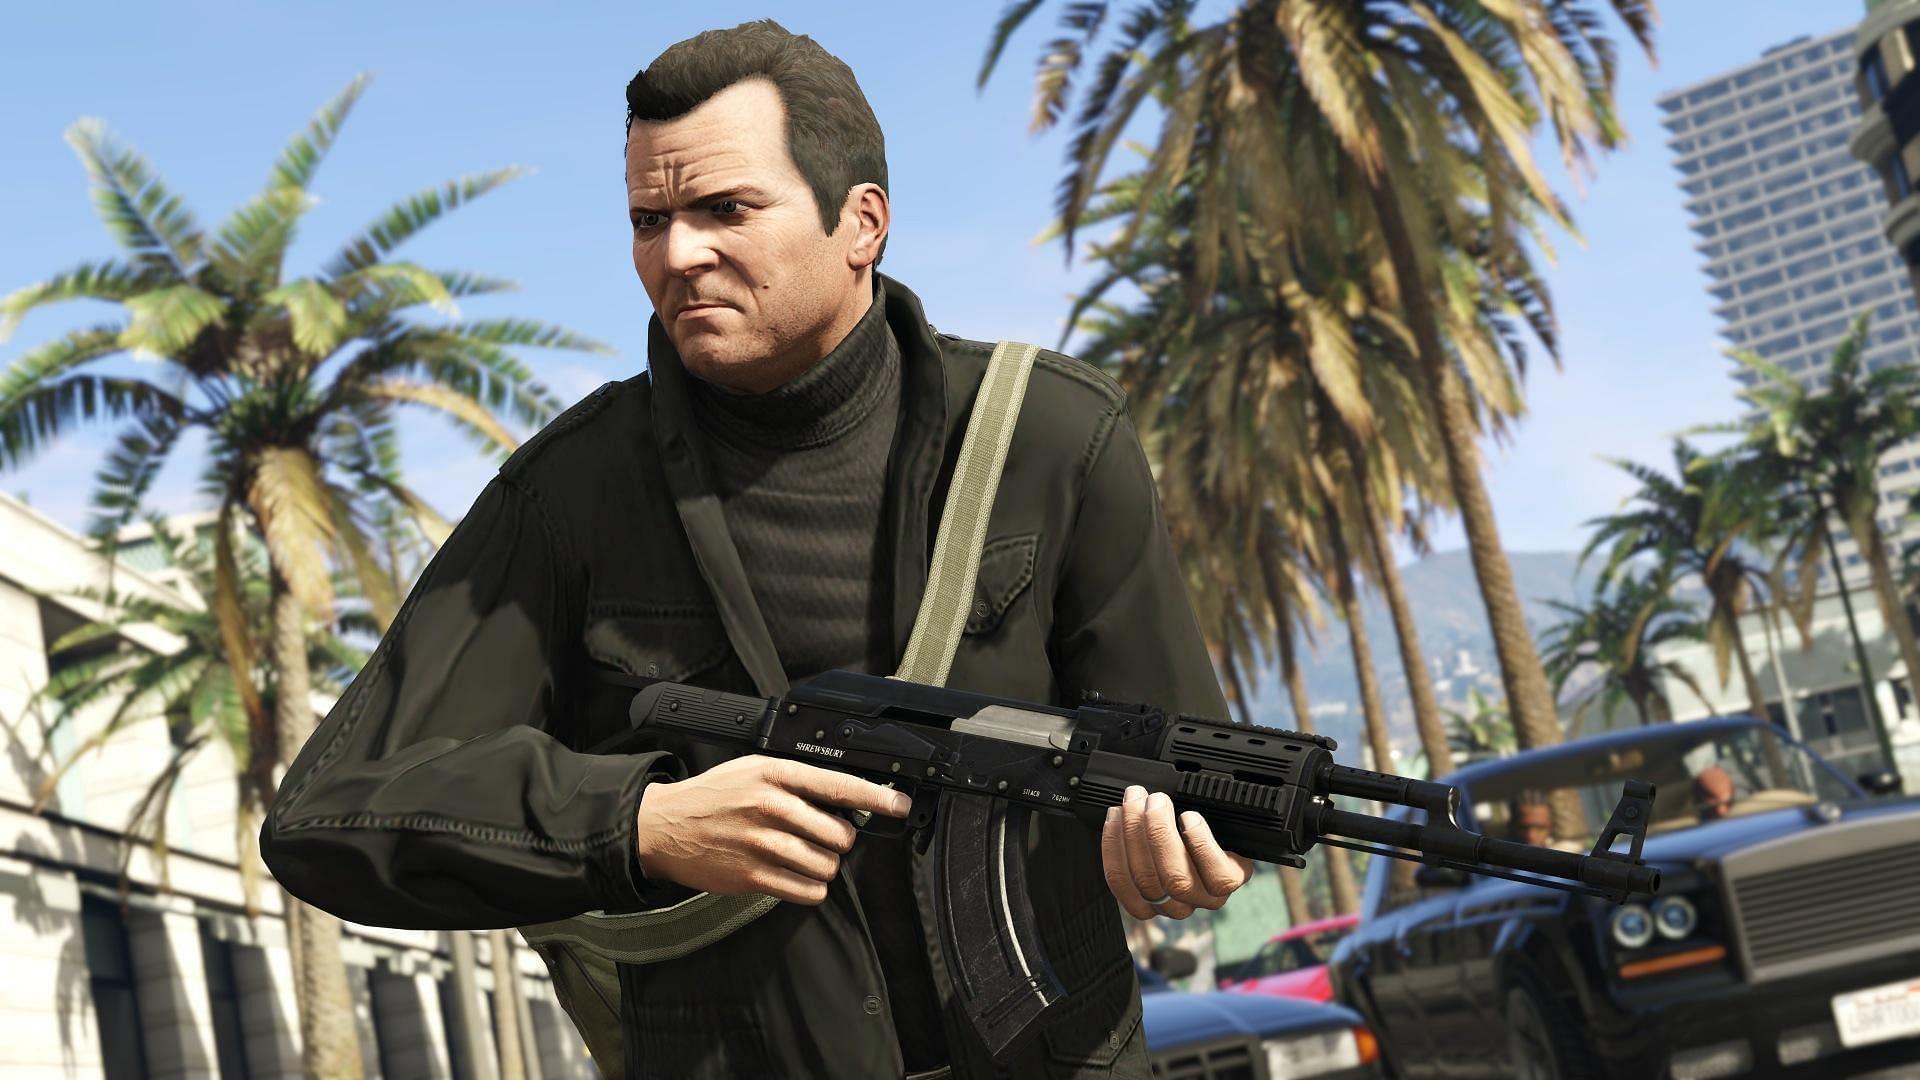 GTA 5 is still in demand, as evident in the recent Xbox leaks